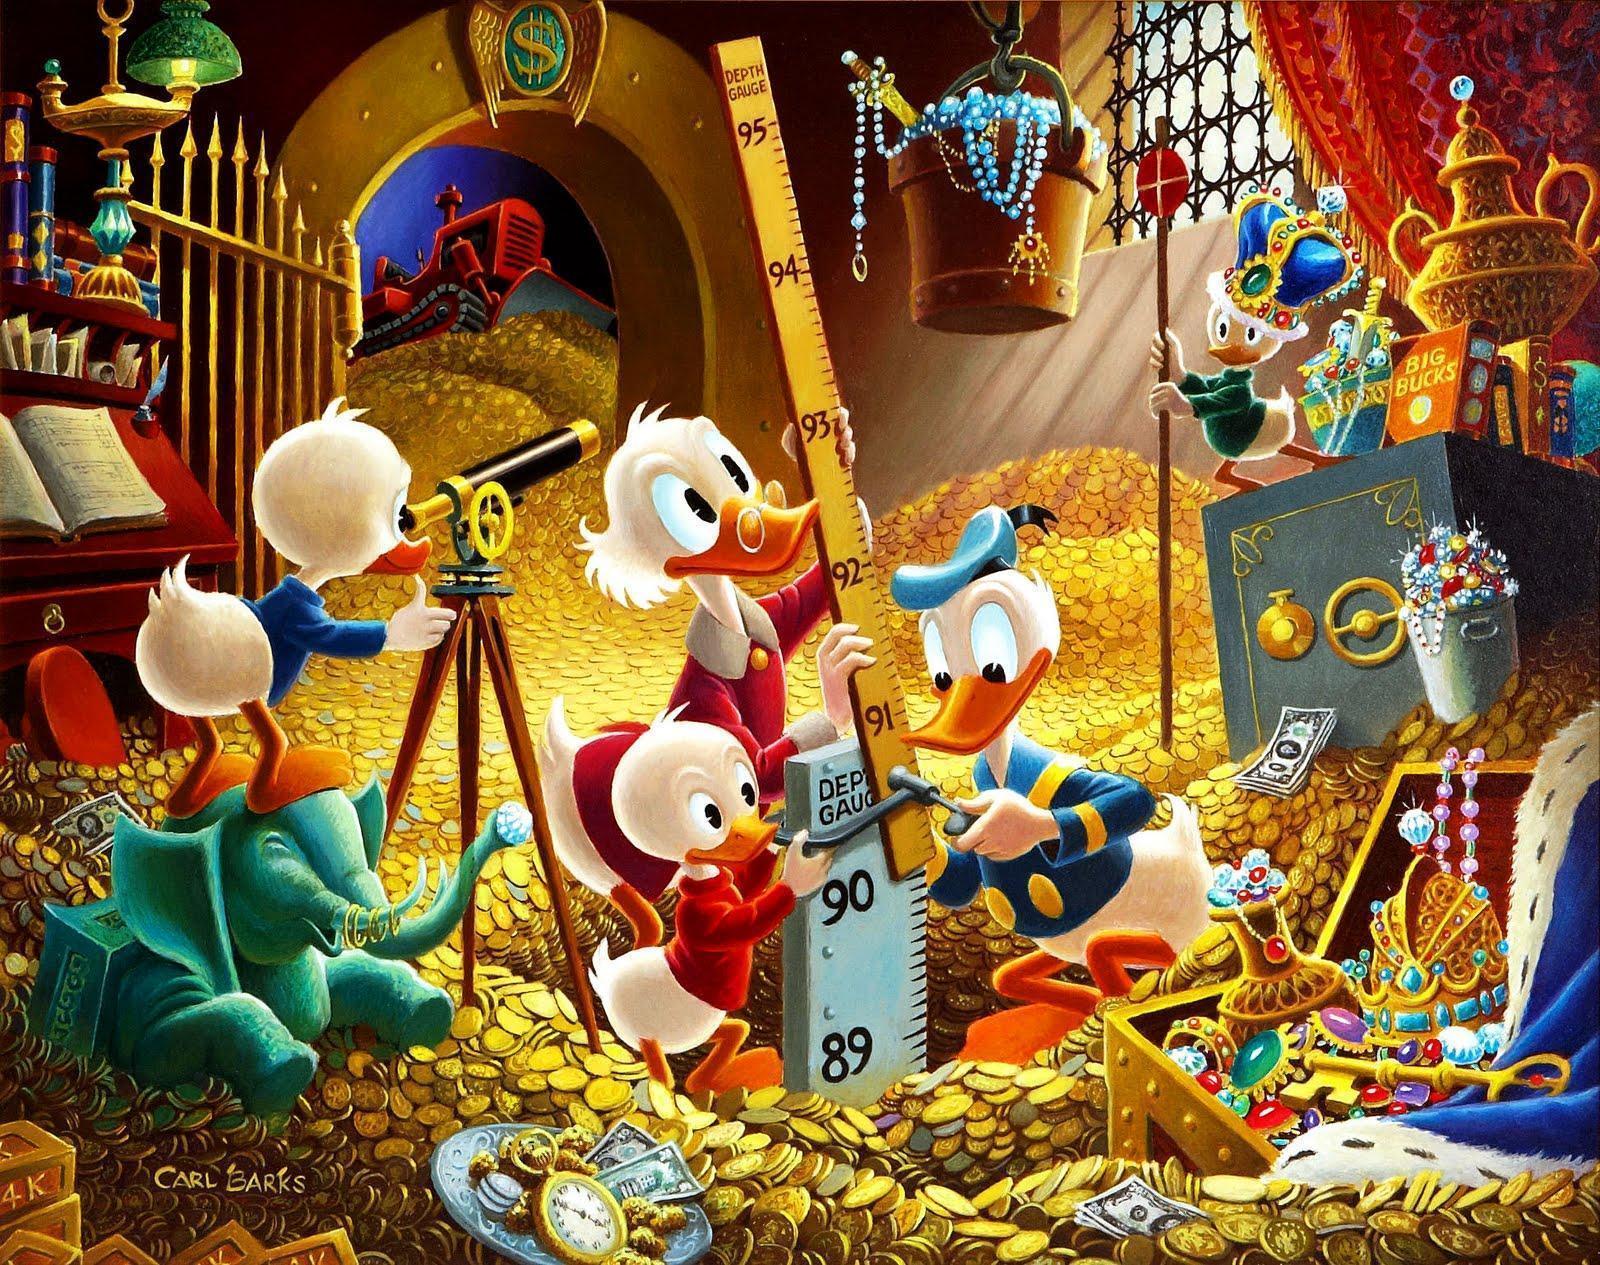 Scrooge Mcduck Carl Barks For Disney Donald Duck With Huey Duey